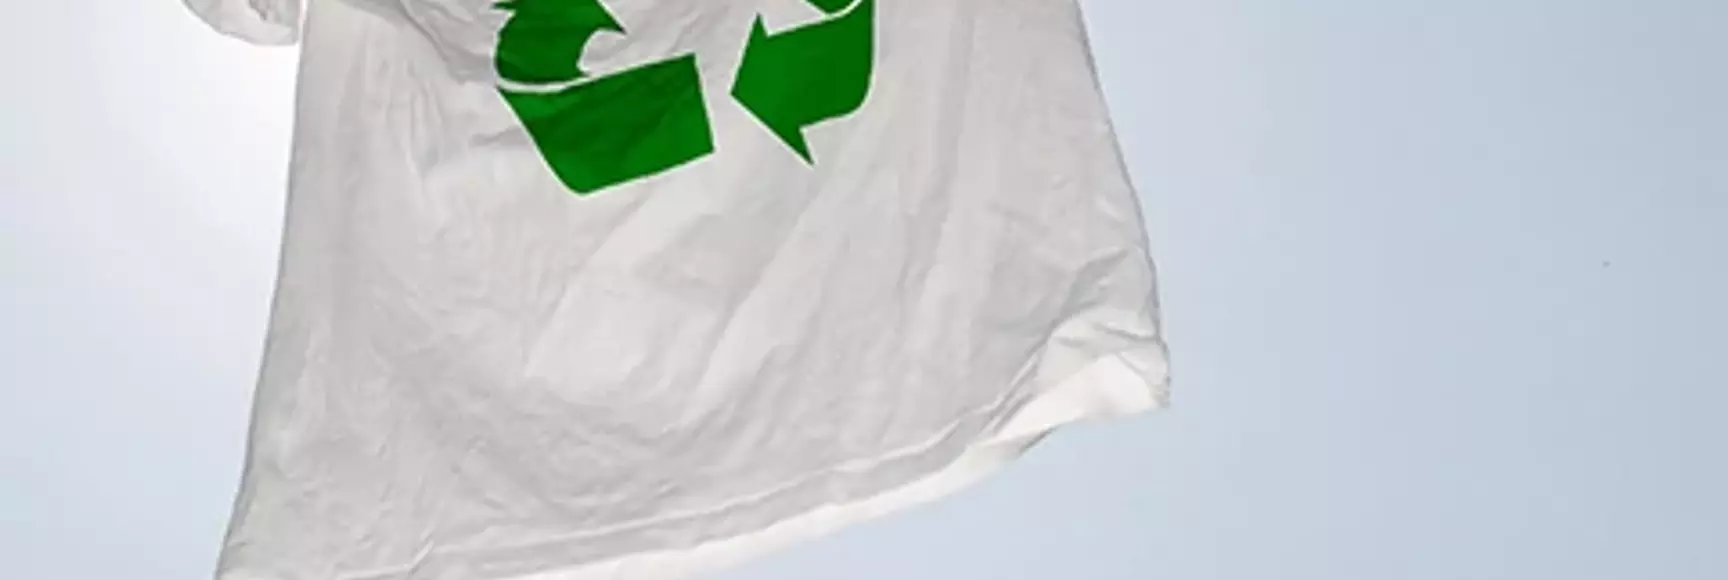 A white t-shirt on a clothesline with recycling logo represents the promise of apparel chemical recycling touted by experts